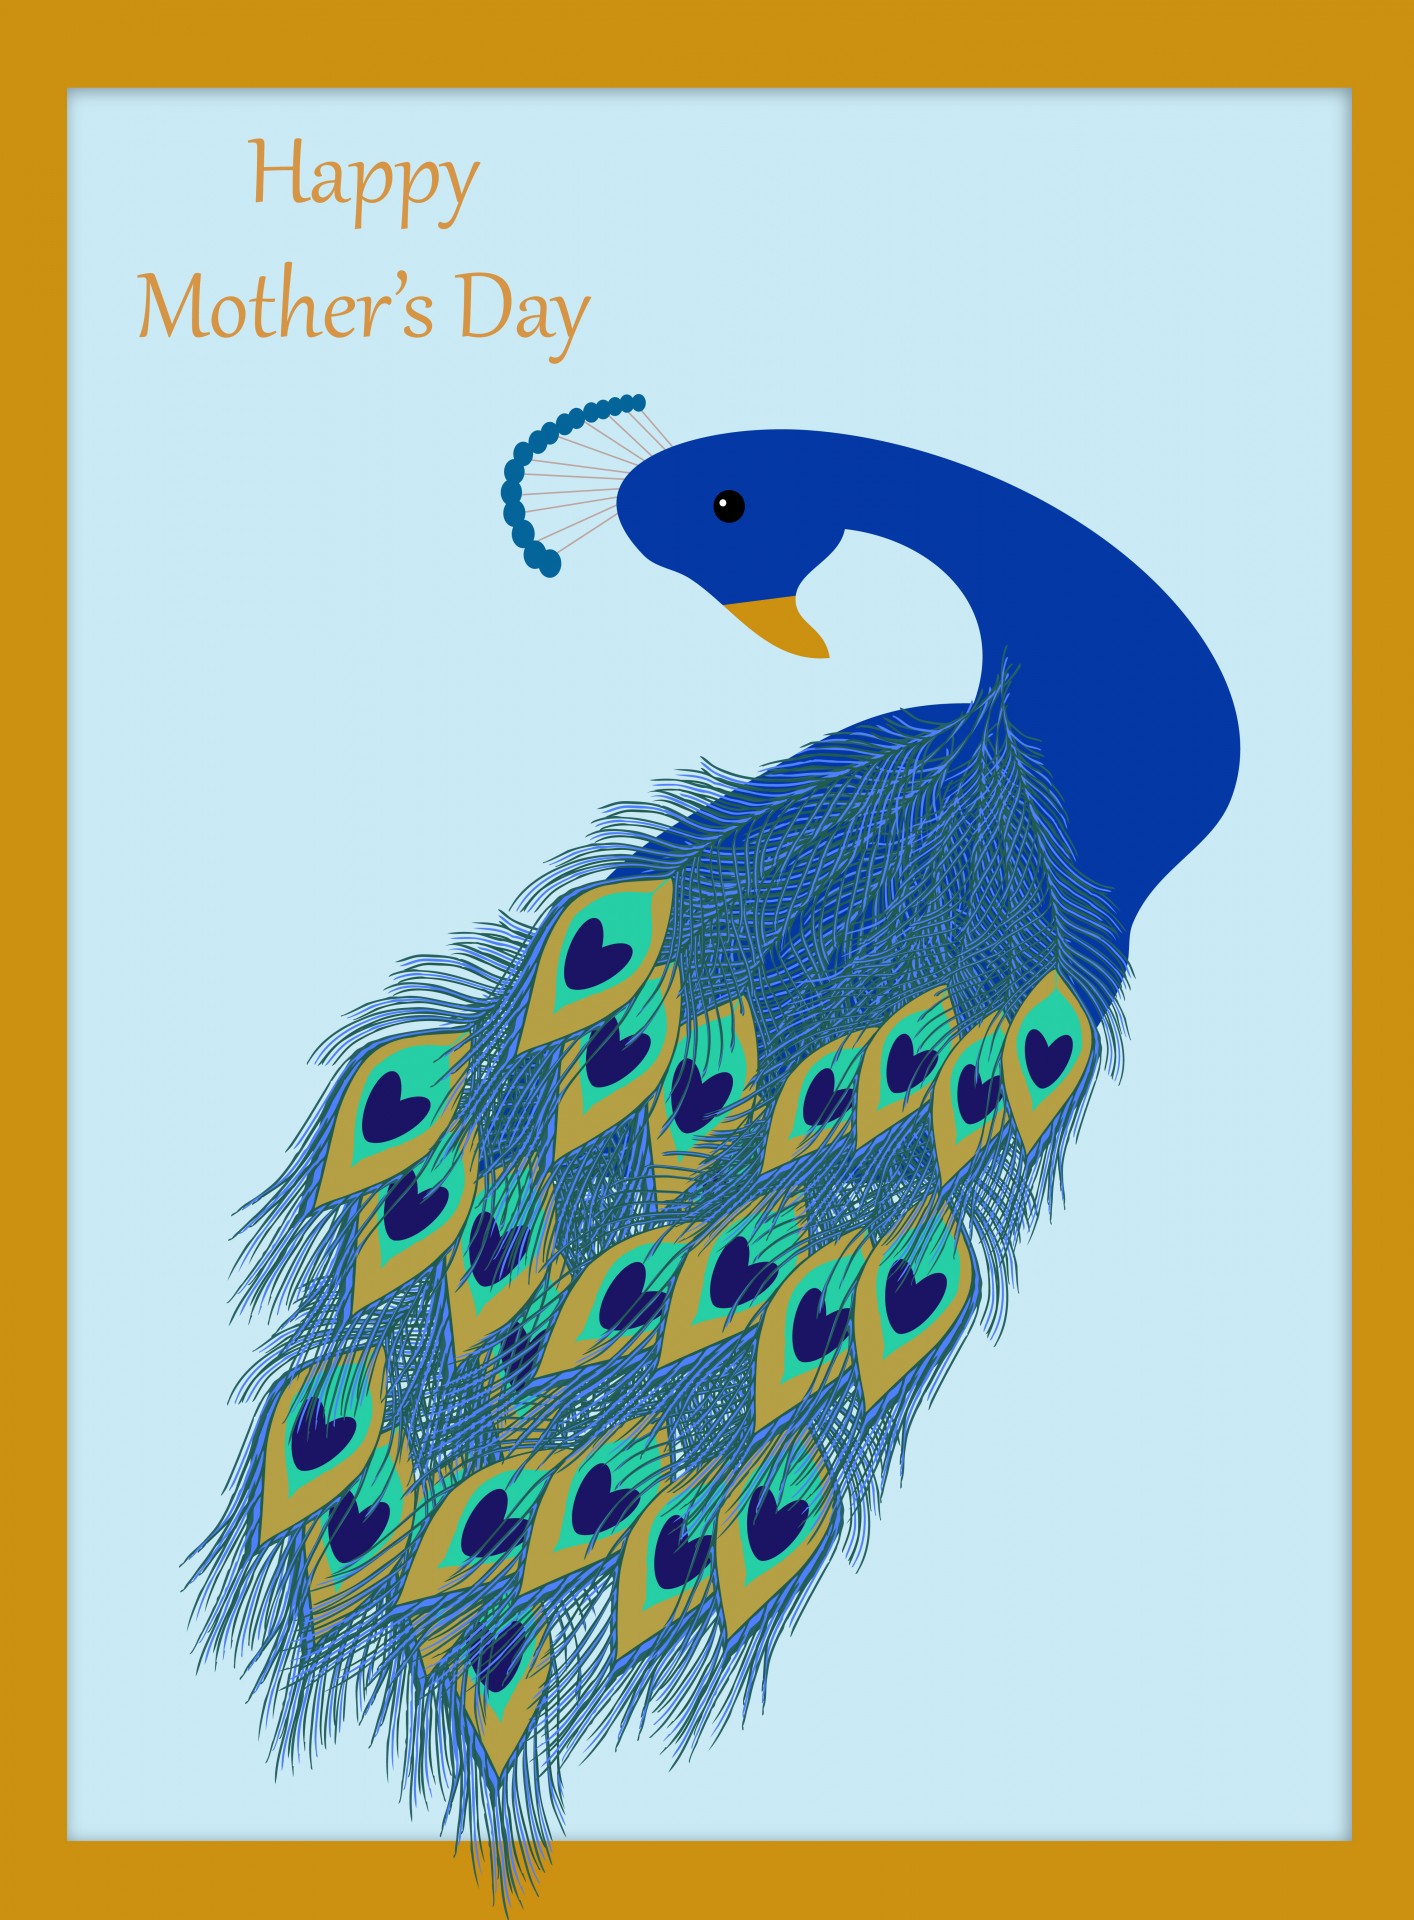 peacock mother's day card card free photo